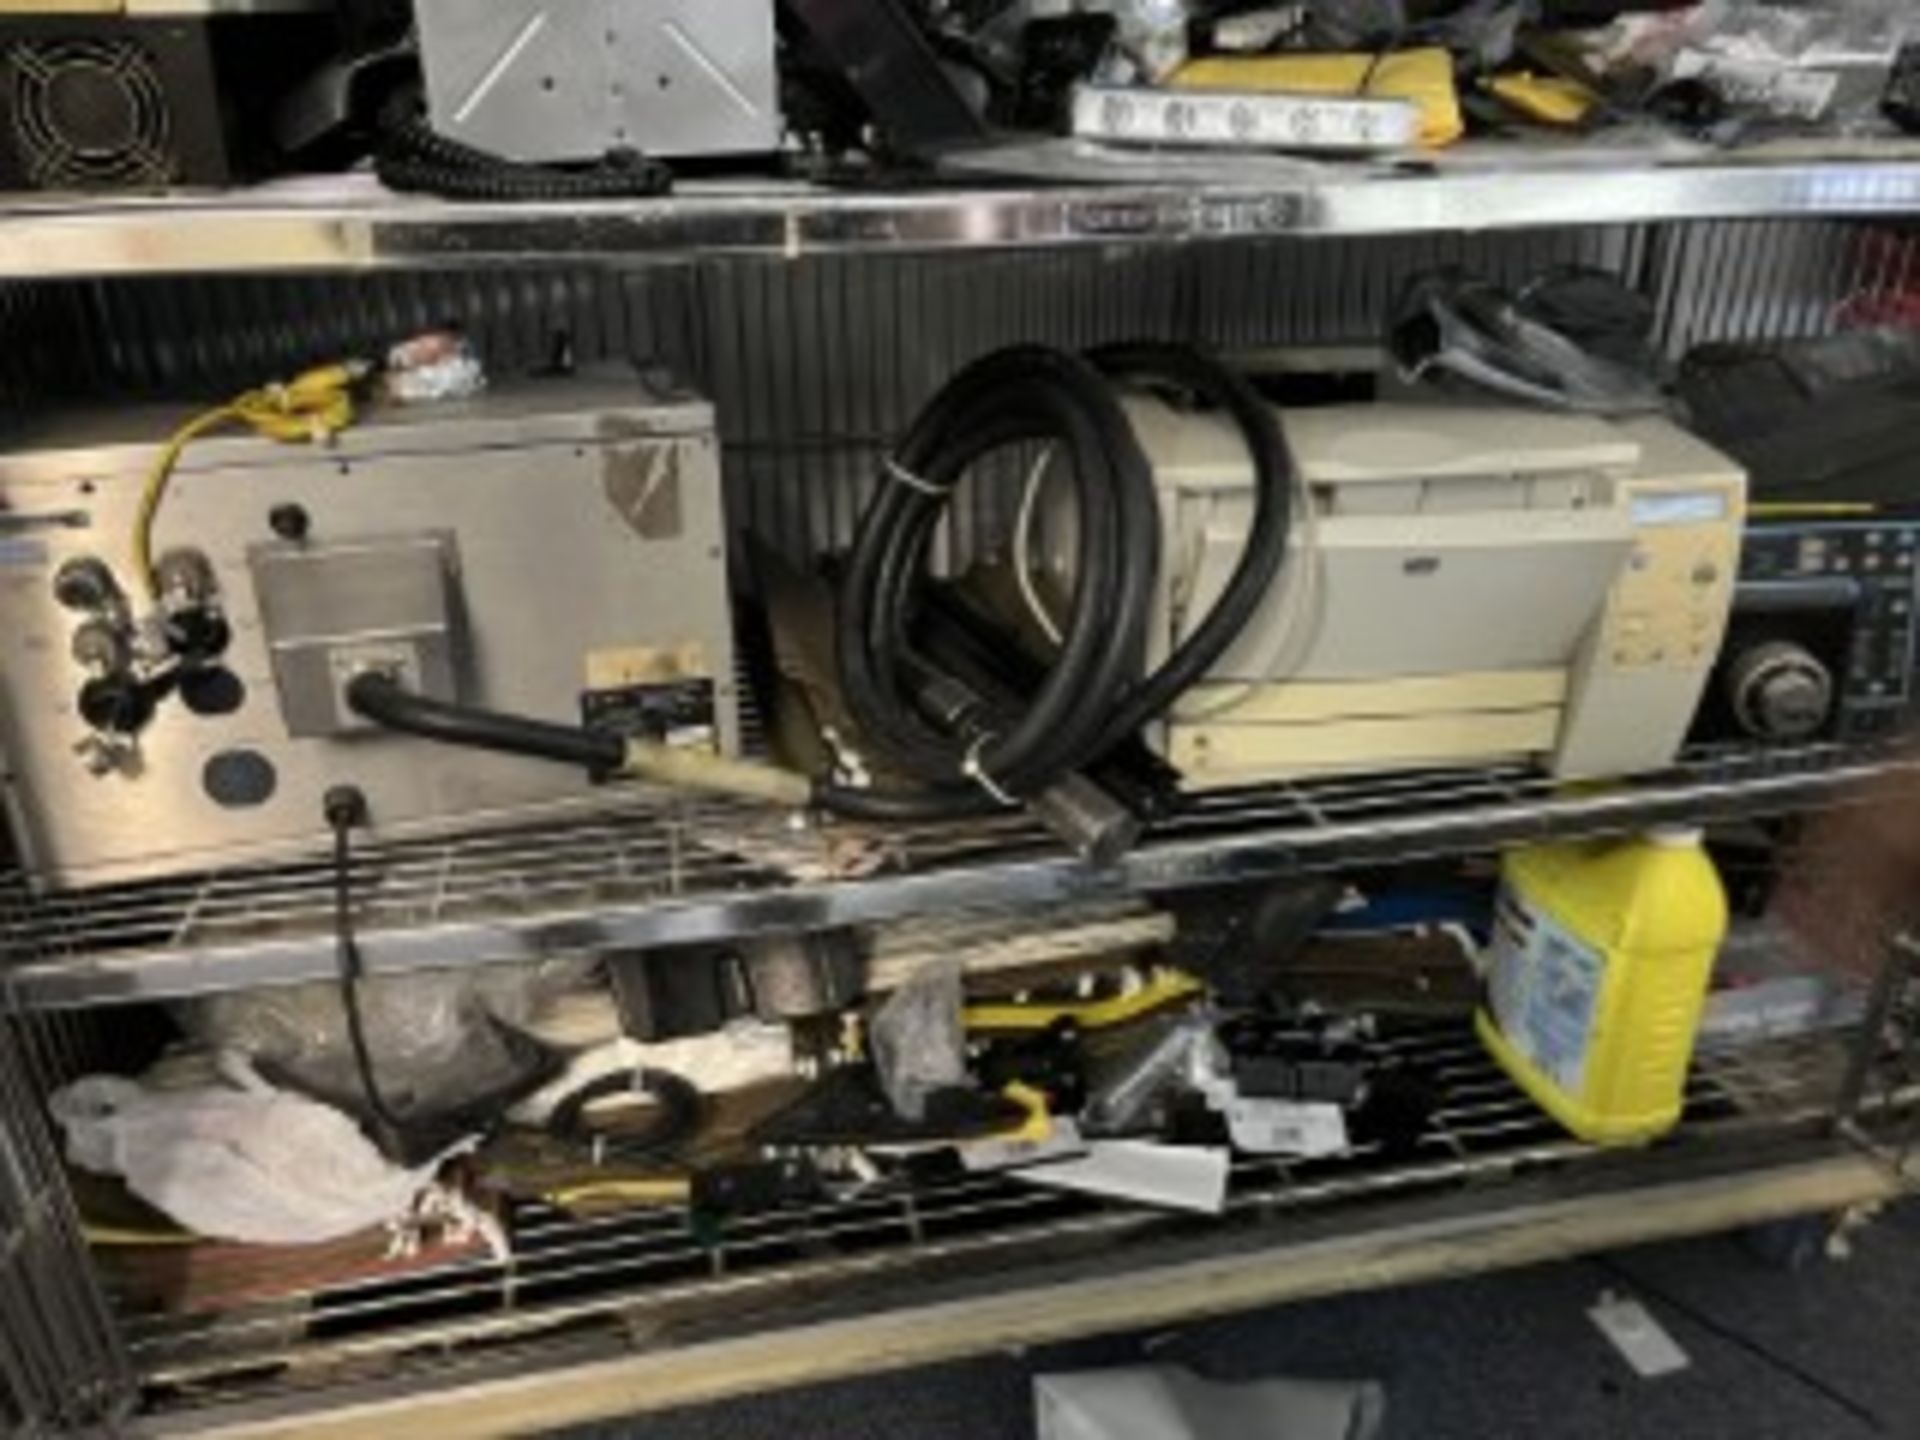 LOT CONTENTS OF CAGE - PRINTERS, ANALYZERS, LIGHTING, HOSES, ETC - Image 3 of 5